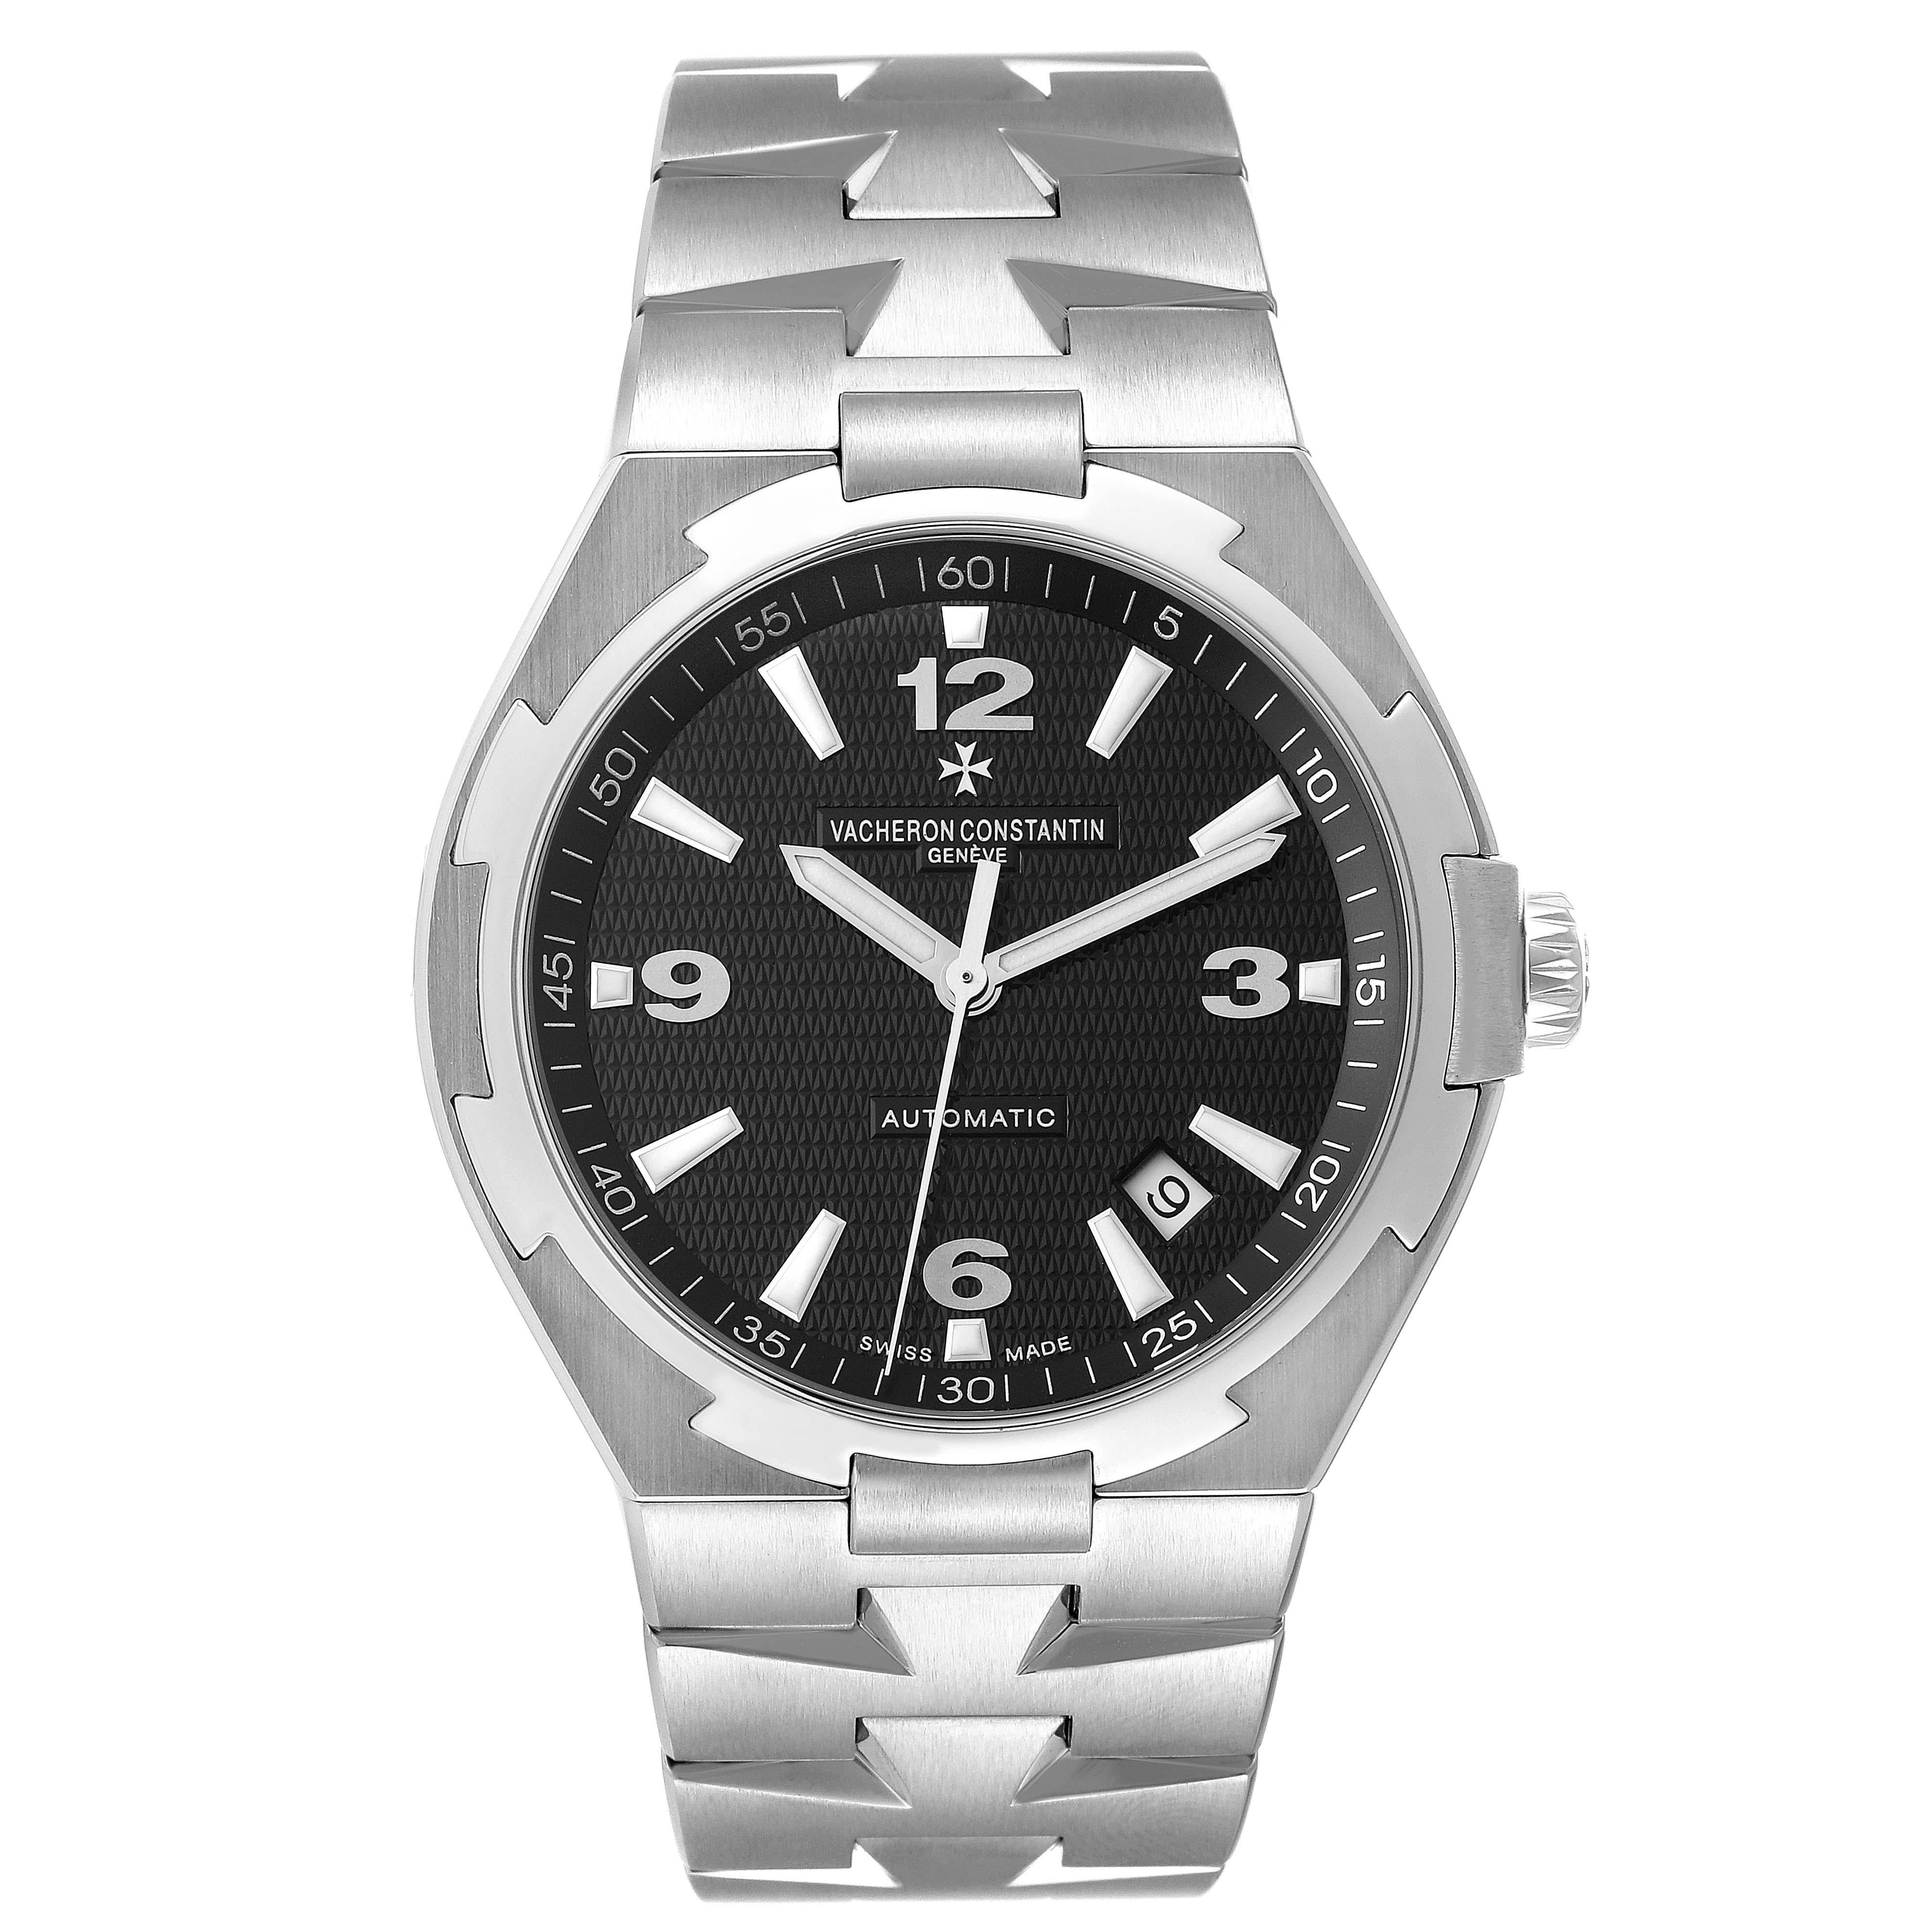 Vacheron Constantin Overseas Black Dial Steel Mens Watch 47040 Box Papers. Automatic self-winding movement. Brushed stainless steel case 42.5 mm in diameter. Screwd down crown. Logo on a crown. Solid case back with 'overseas' medalion. Polished